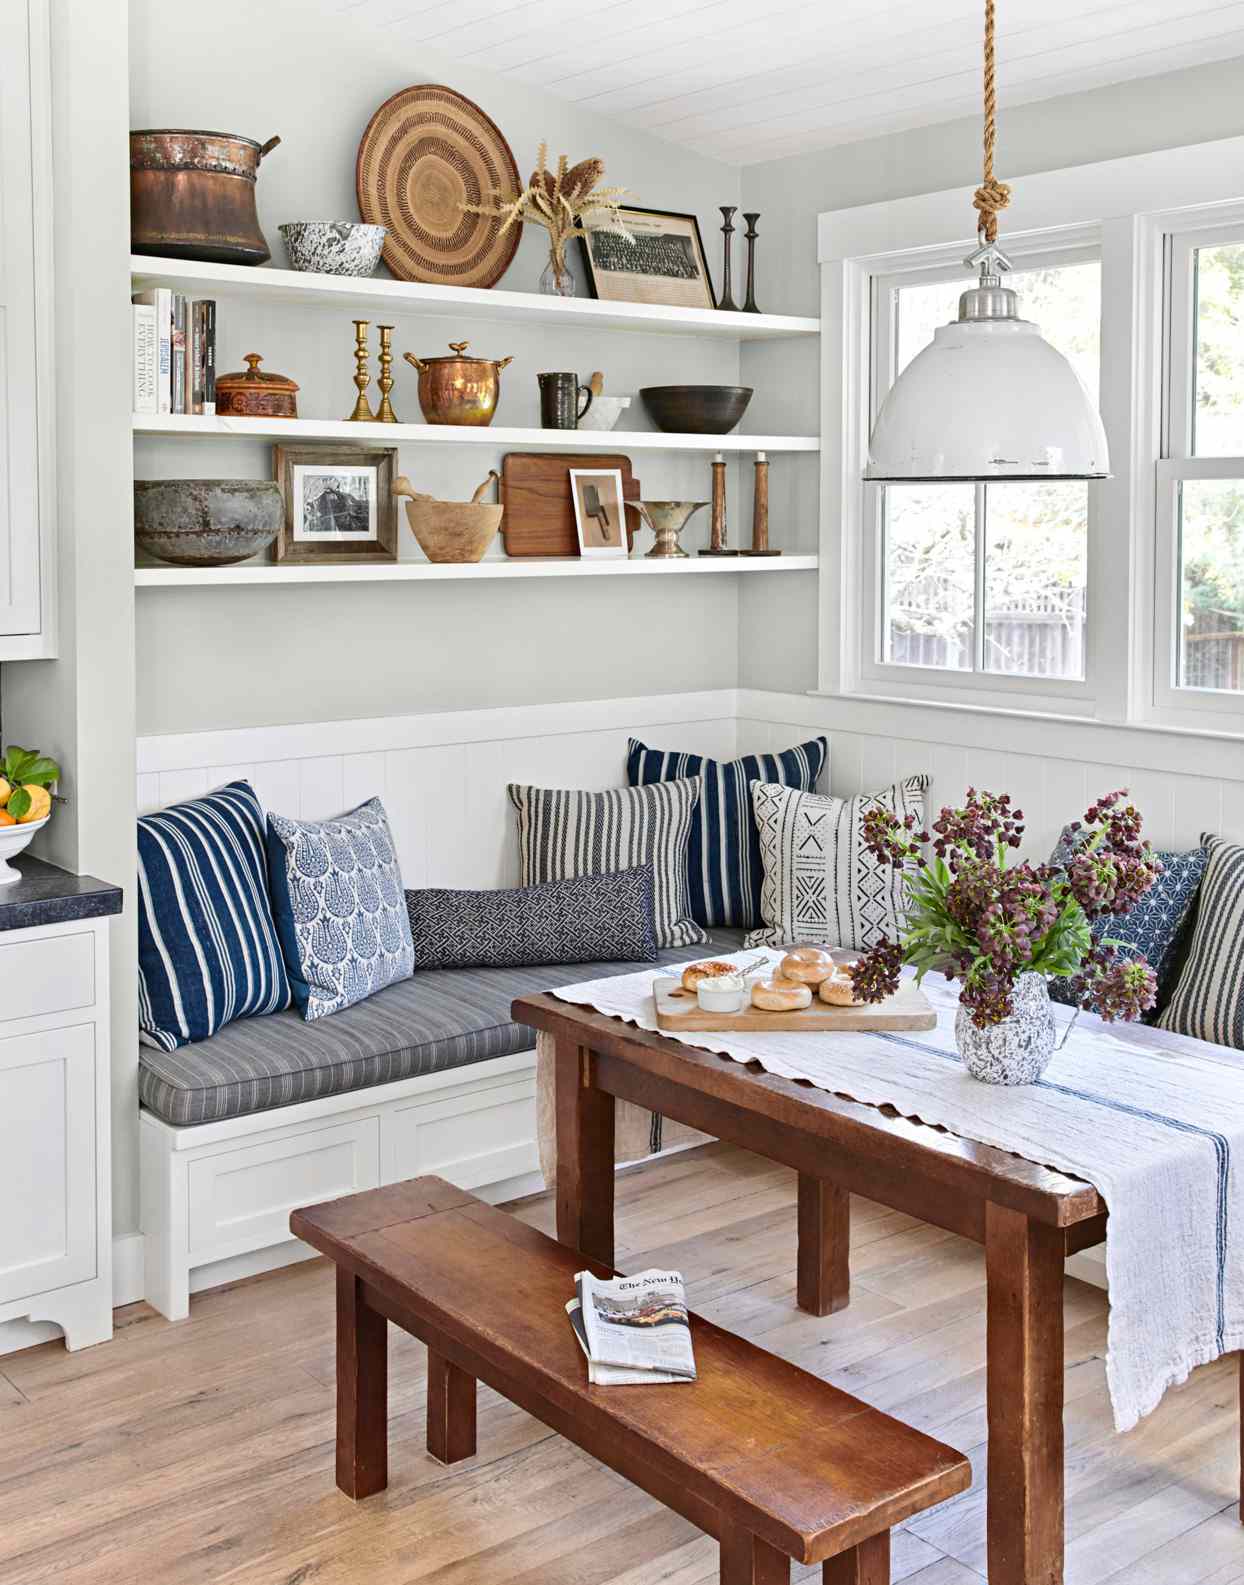 Easy-Access Banquette Storage